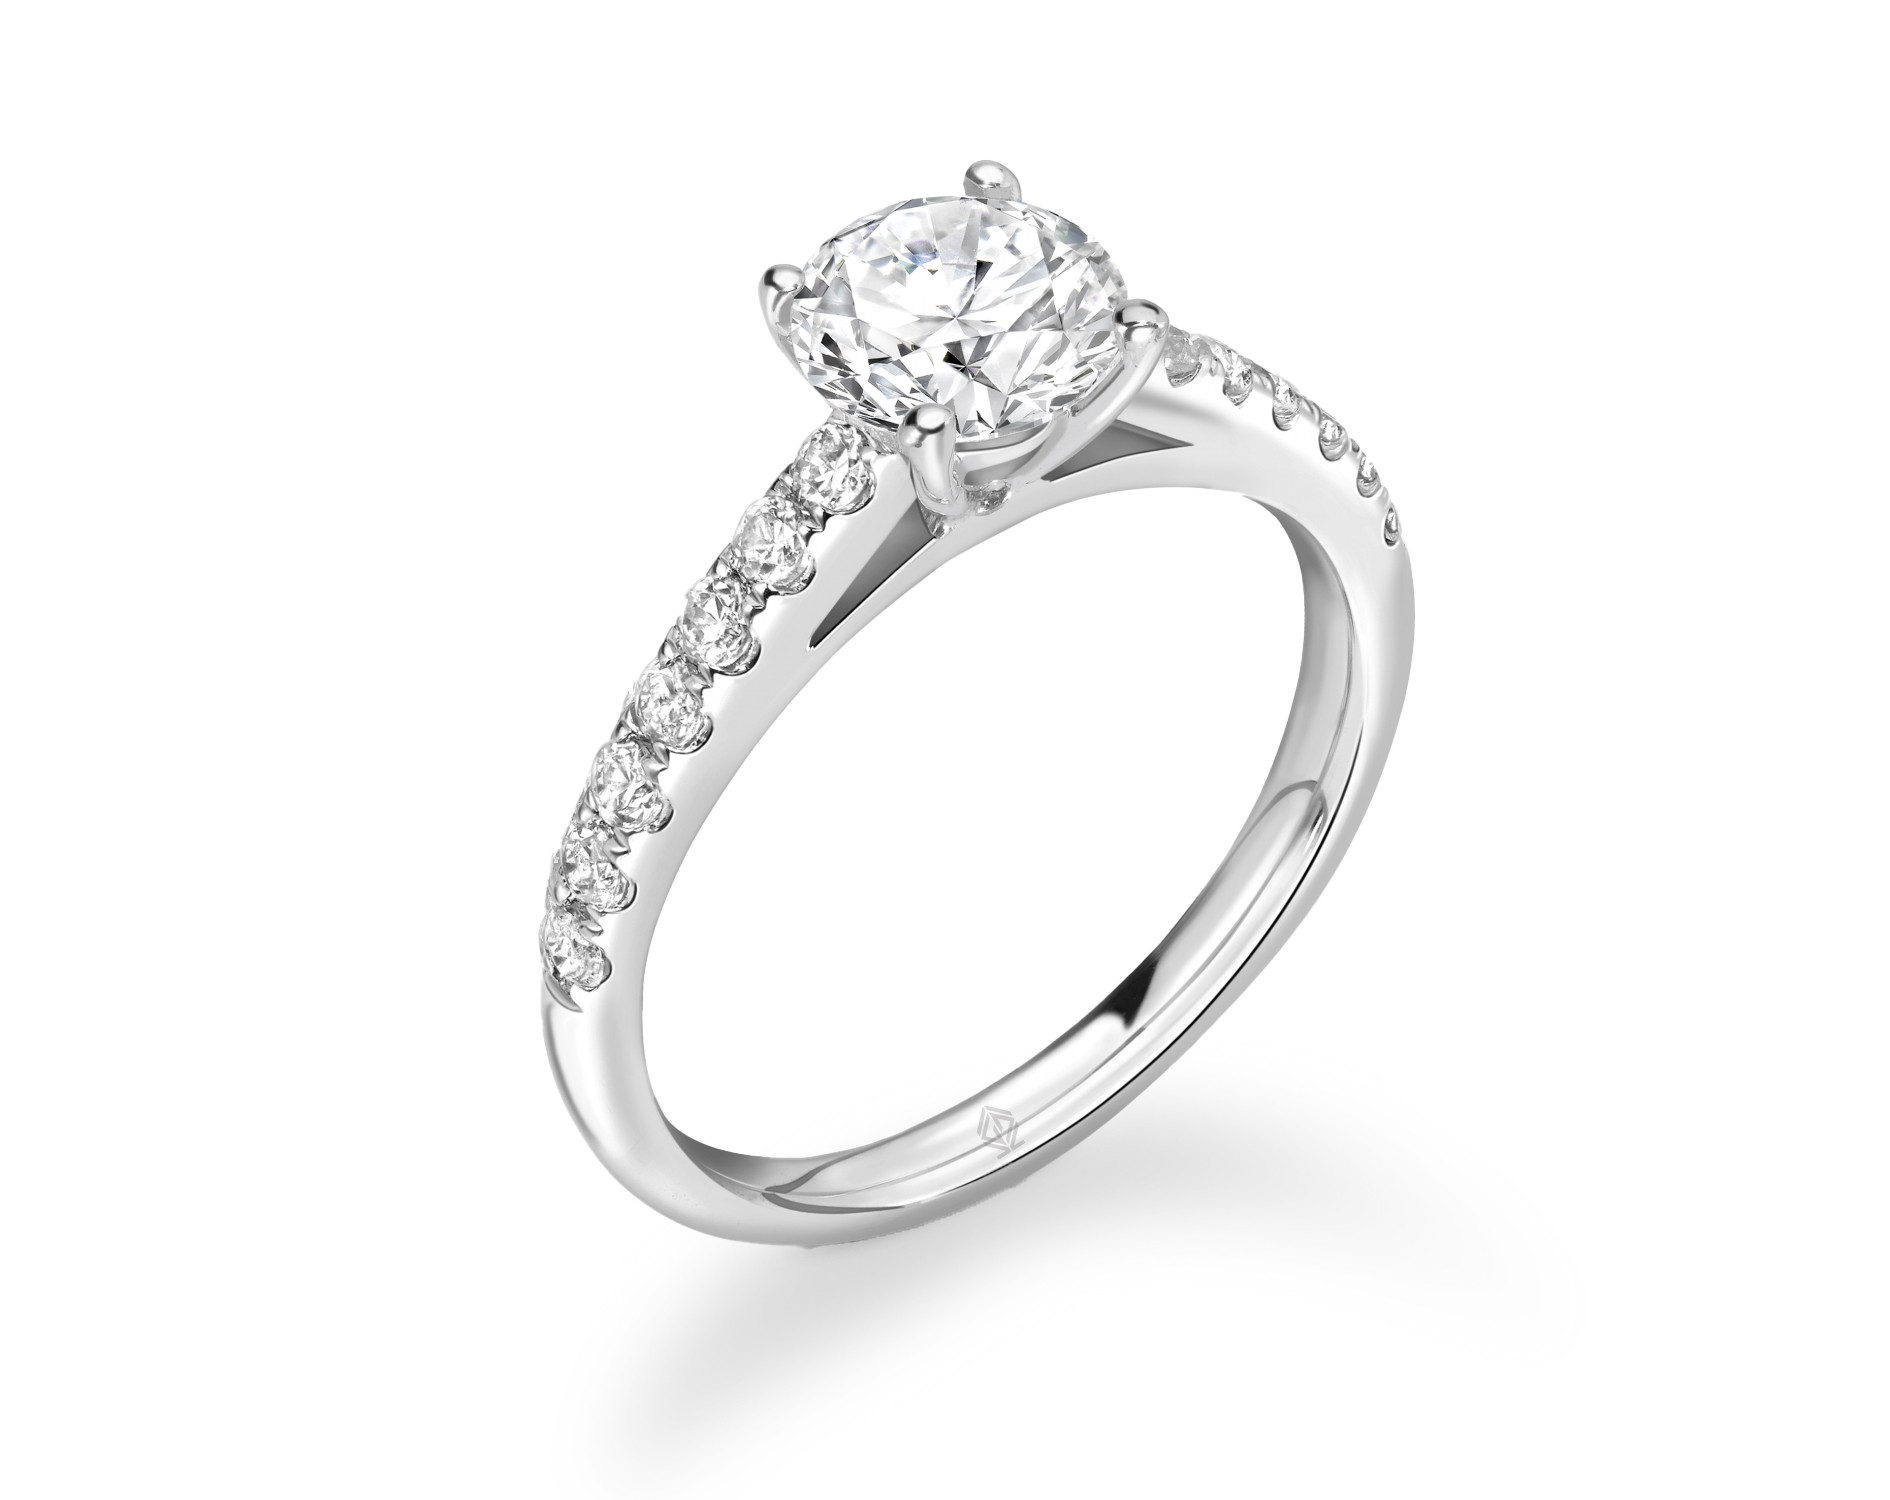 18K WHITE GOLD ROUND CUT 4 PRONGS DIAMOND ENGAGEMENT RING WITH SIDE STONES PAVE SET